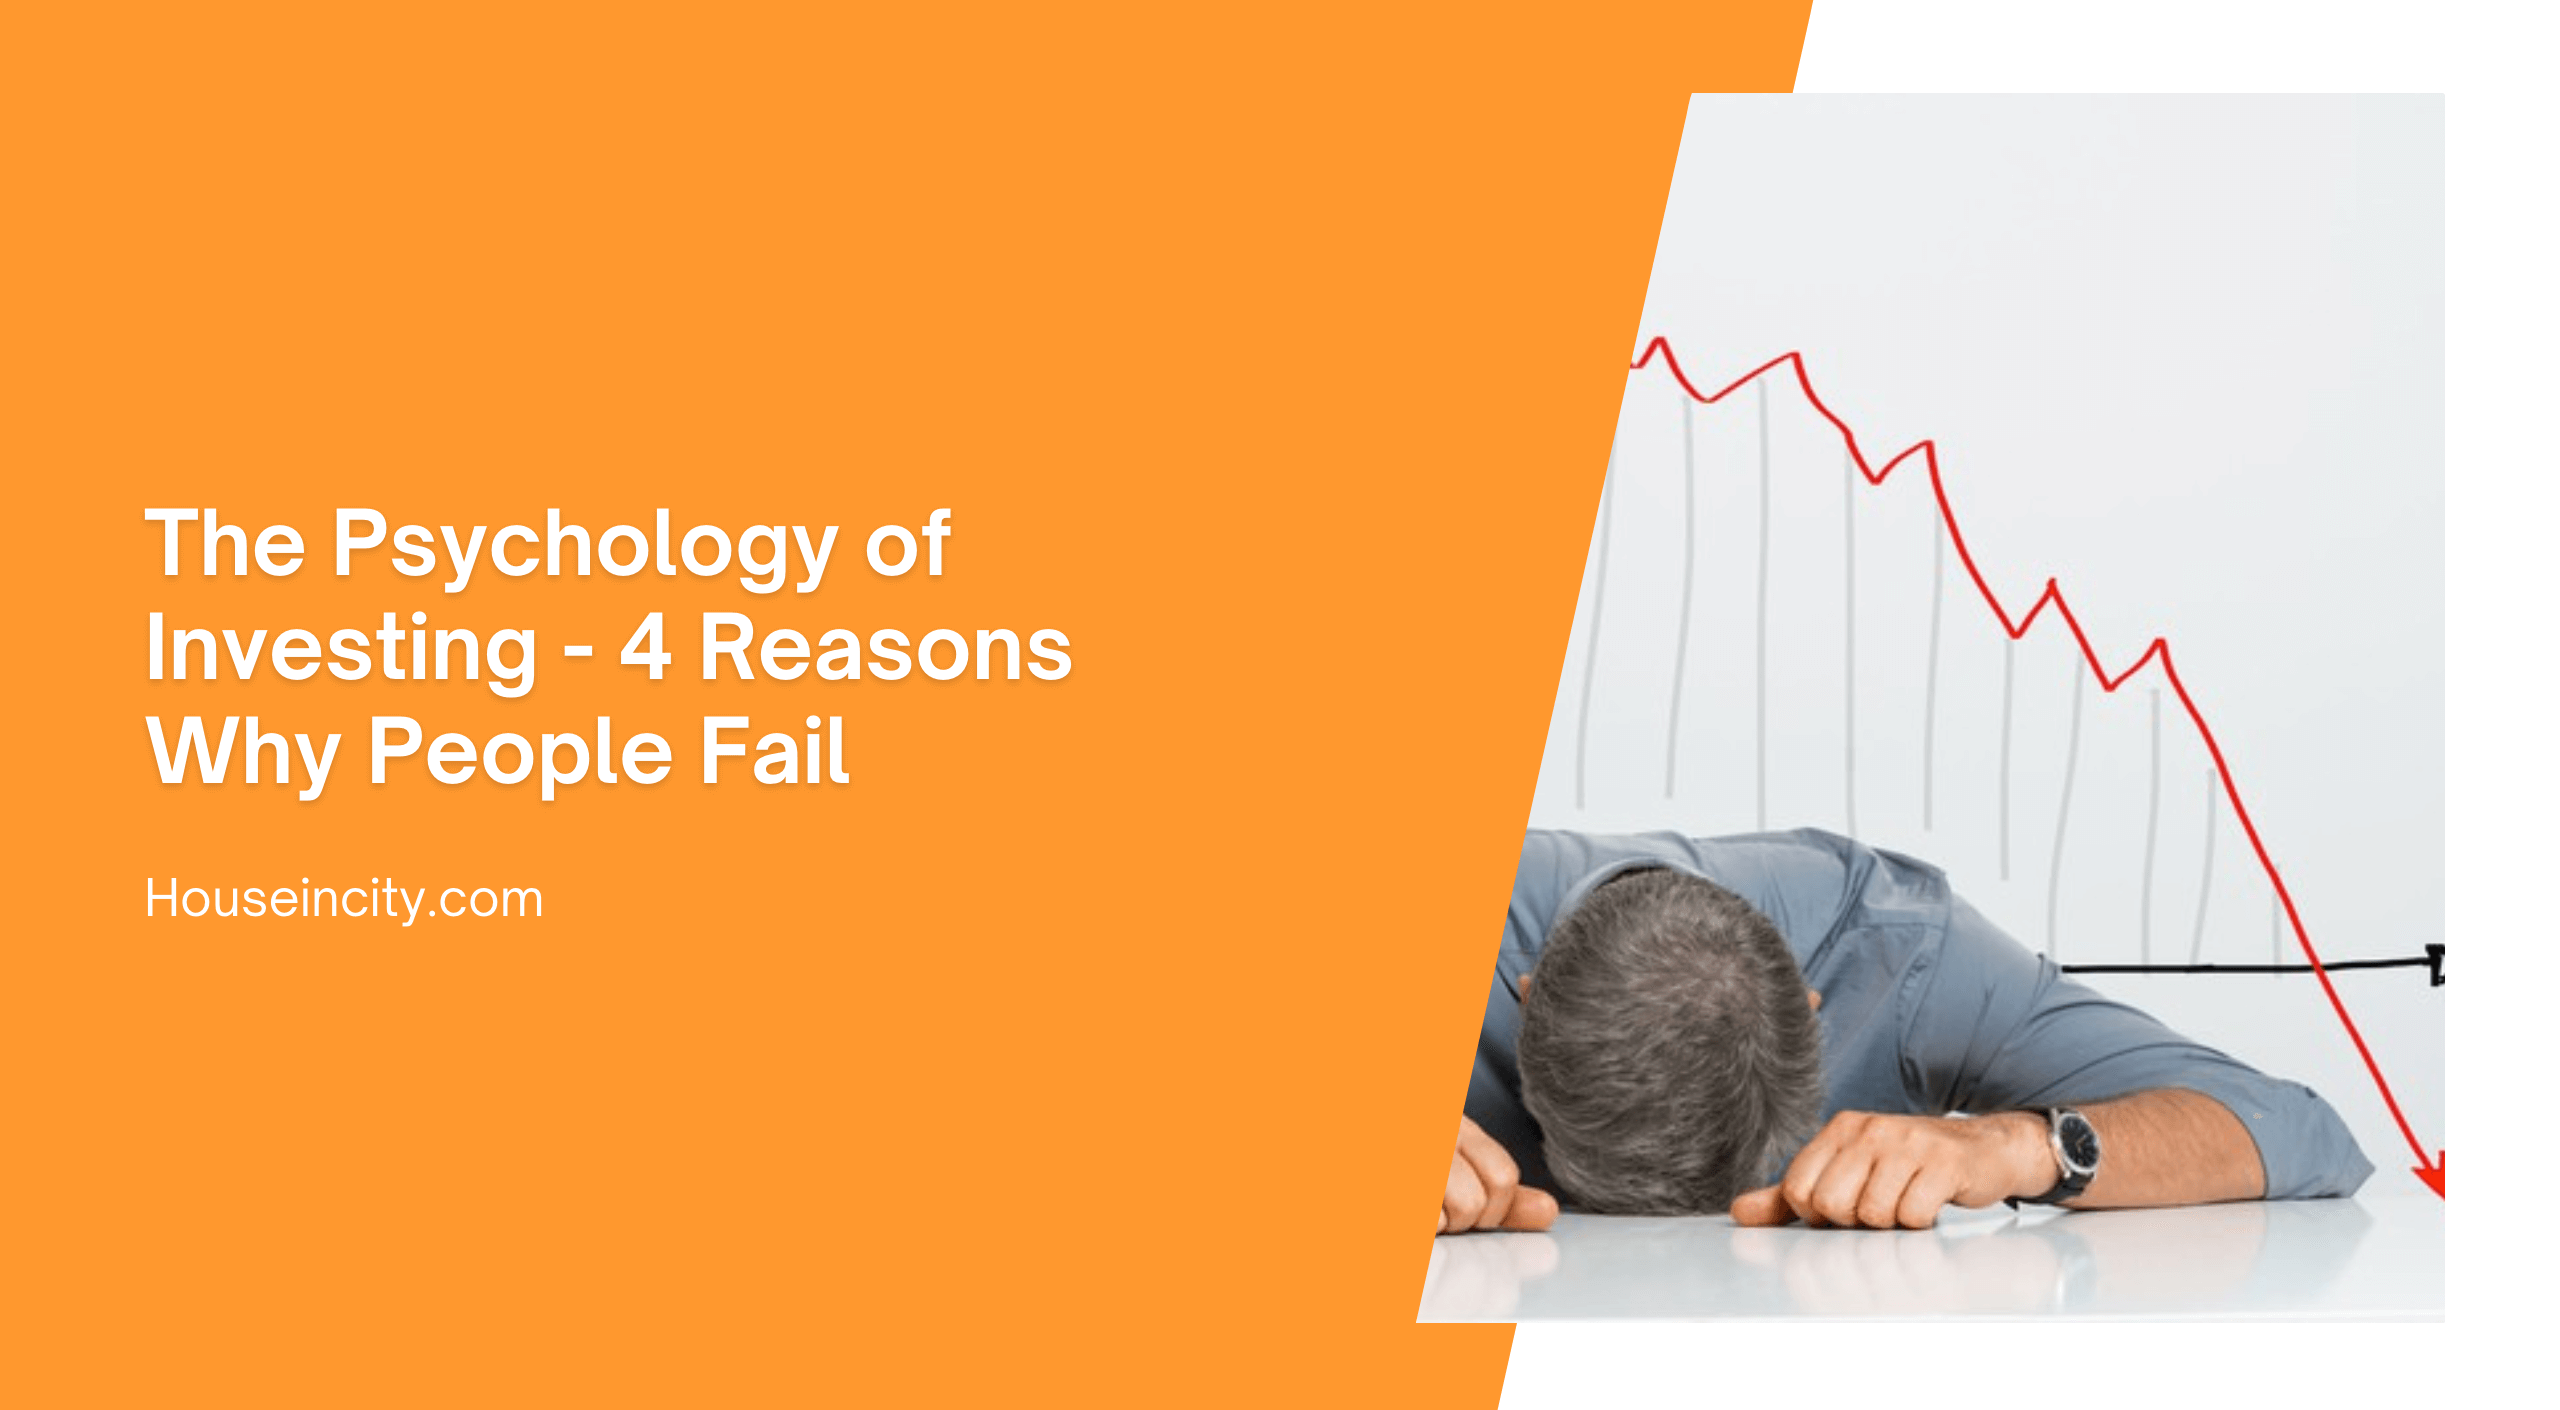 The Psychology of Investing - 4 Reasons Why People Fail